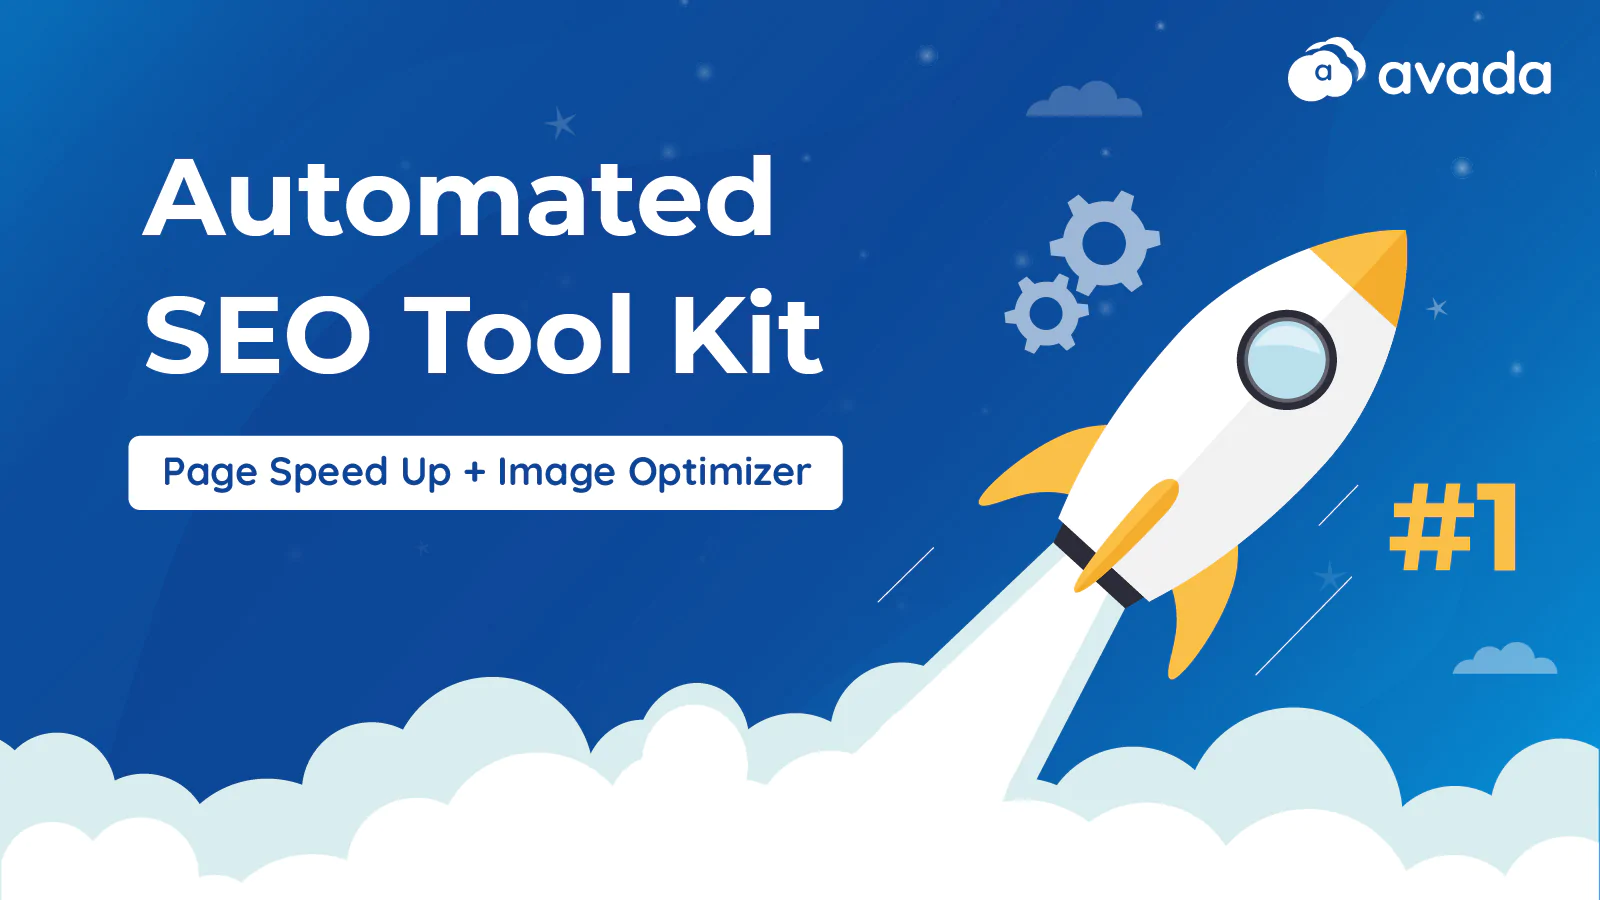 SEO: Image Optimizer Page Speed